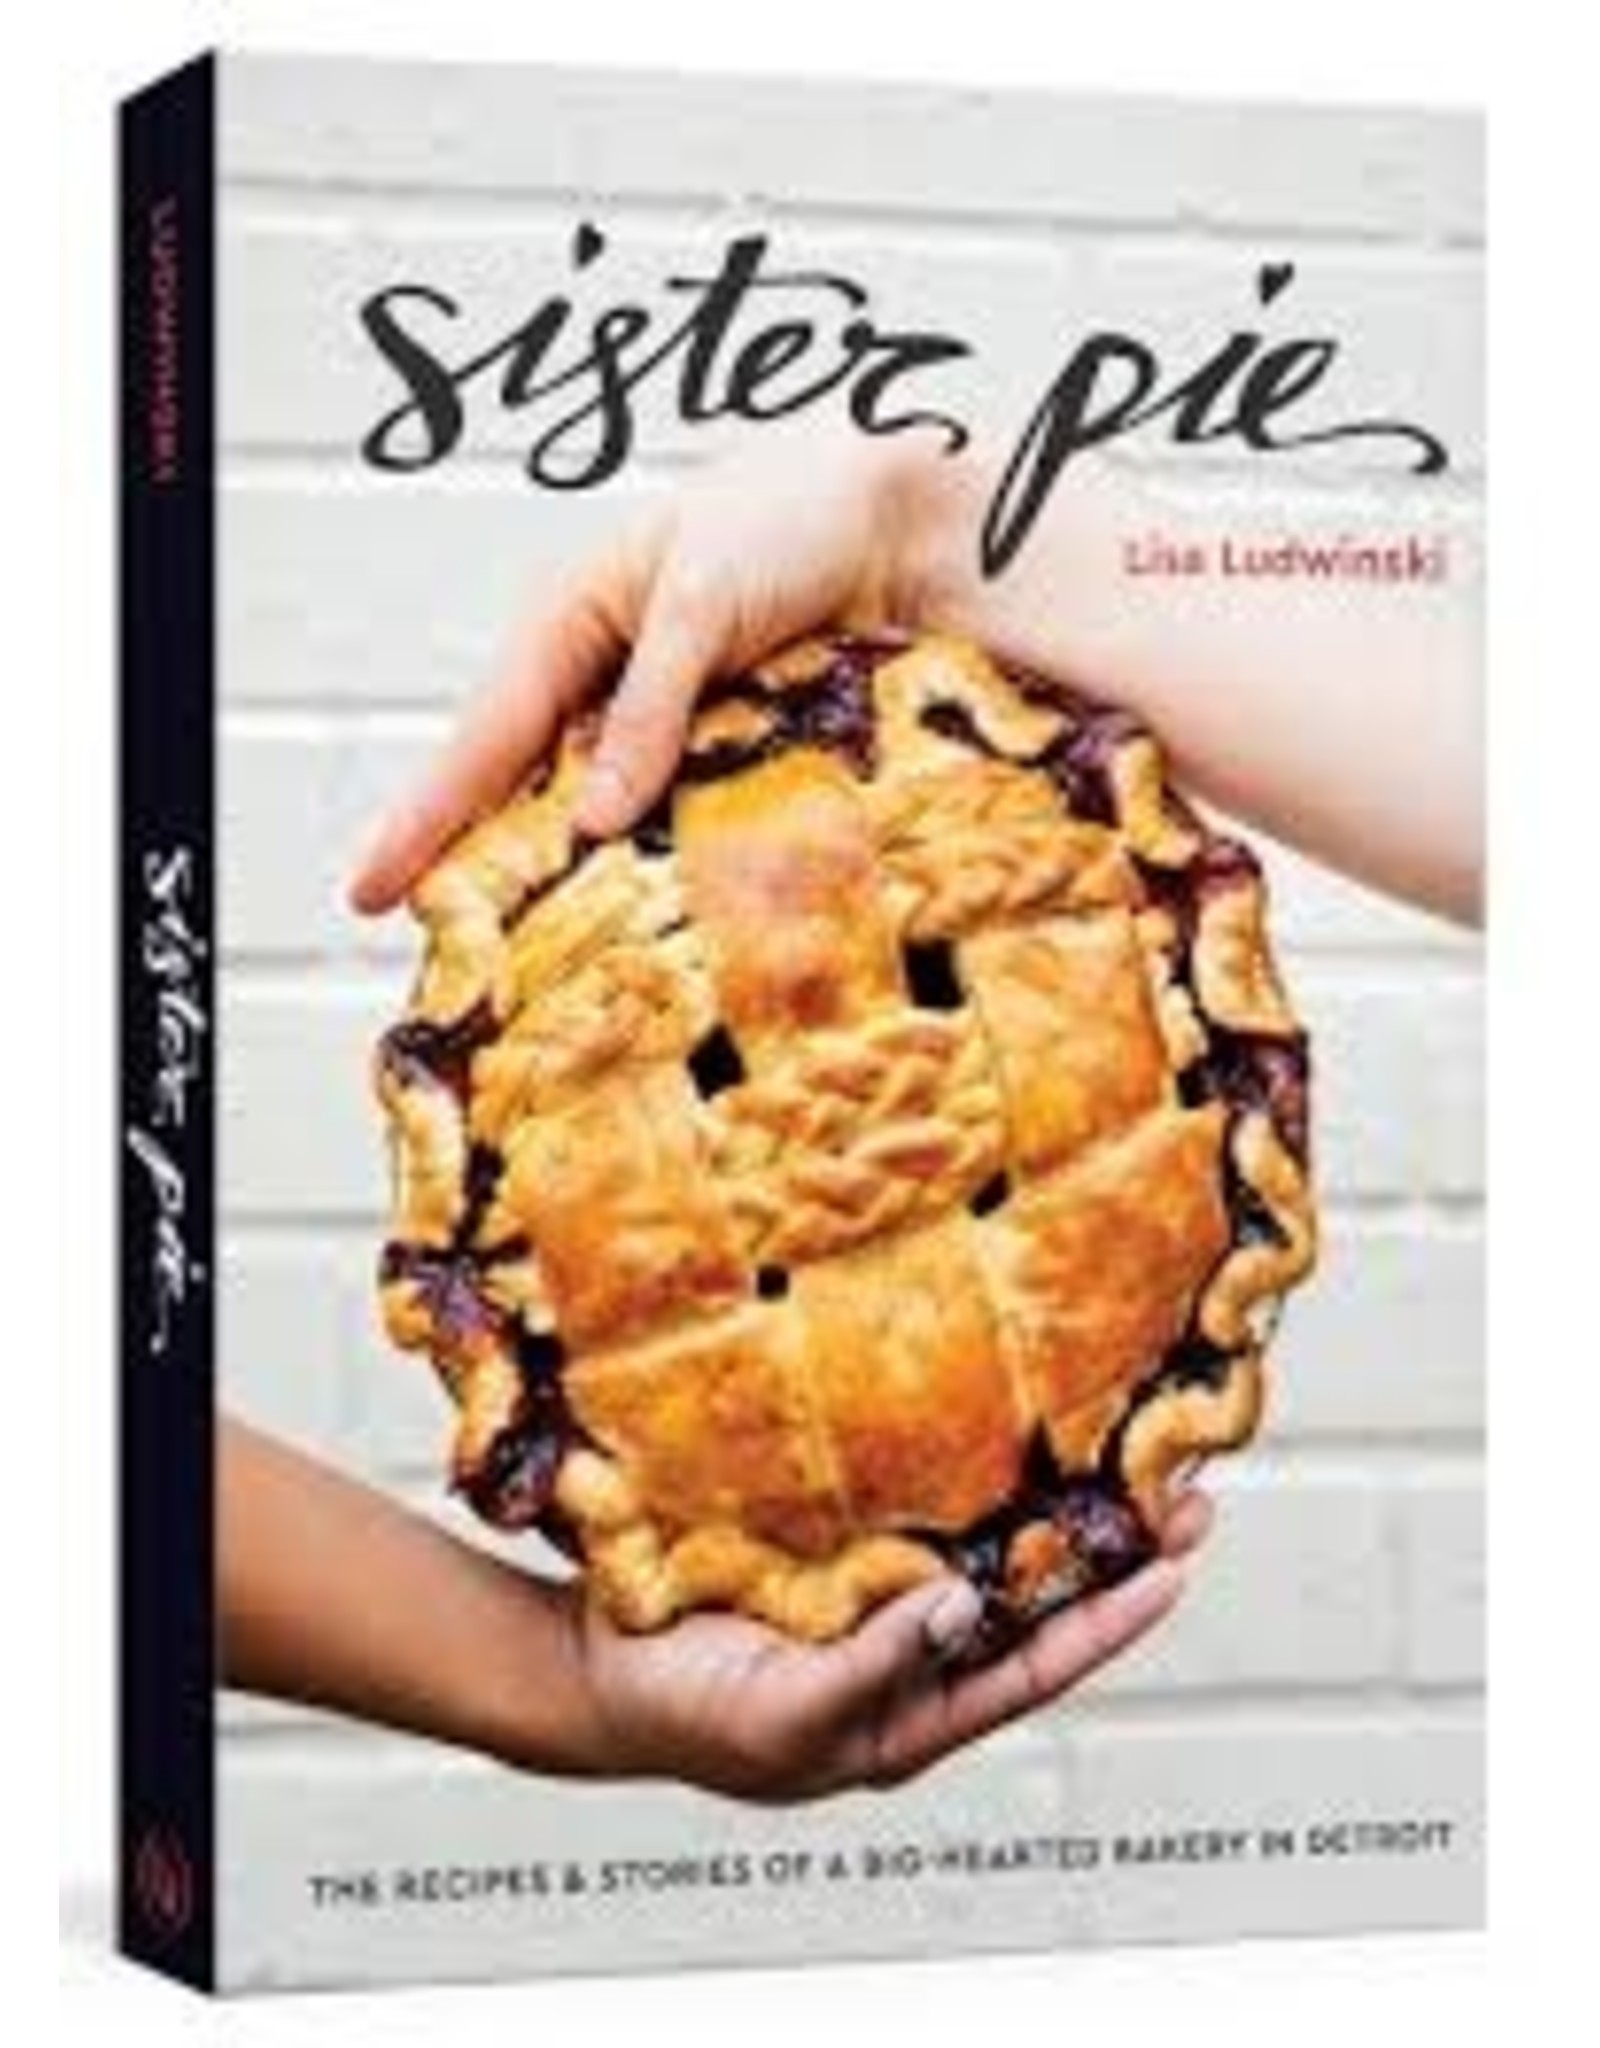 Books Sister Pie: The Recipes & Stories of a Big-Hearted Bakery in Detroit by Lisa Ludwinski